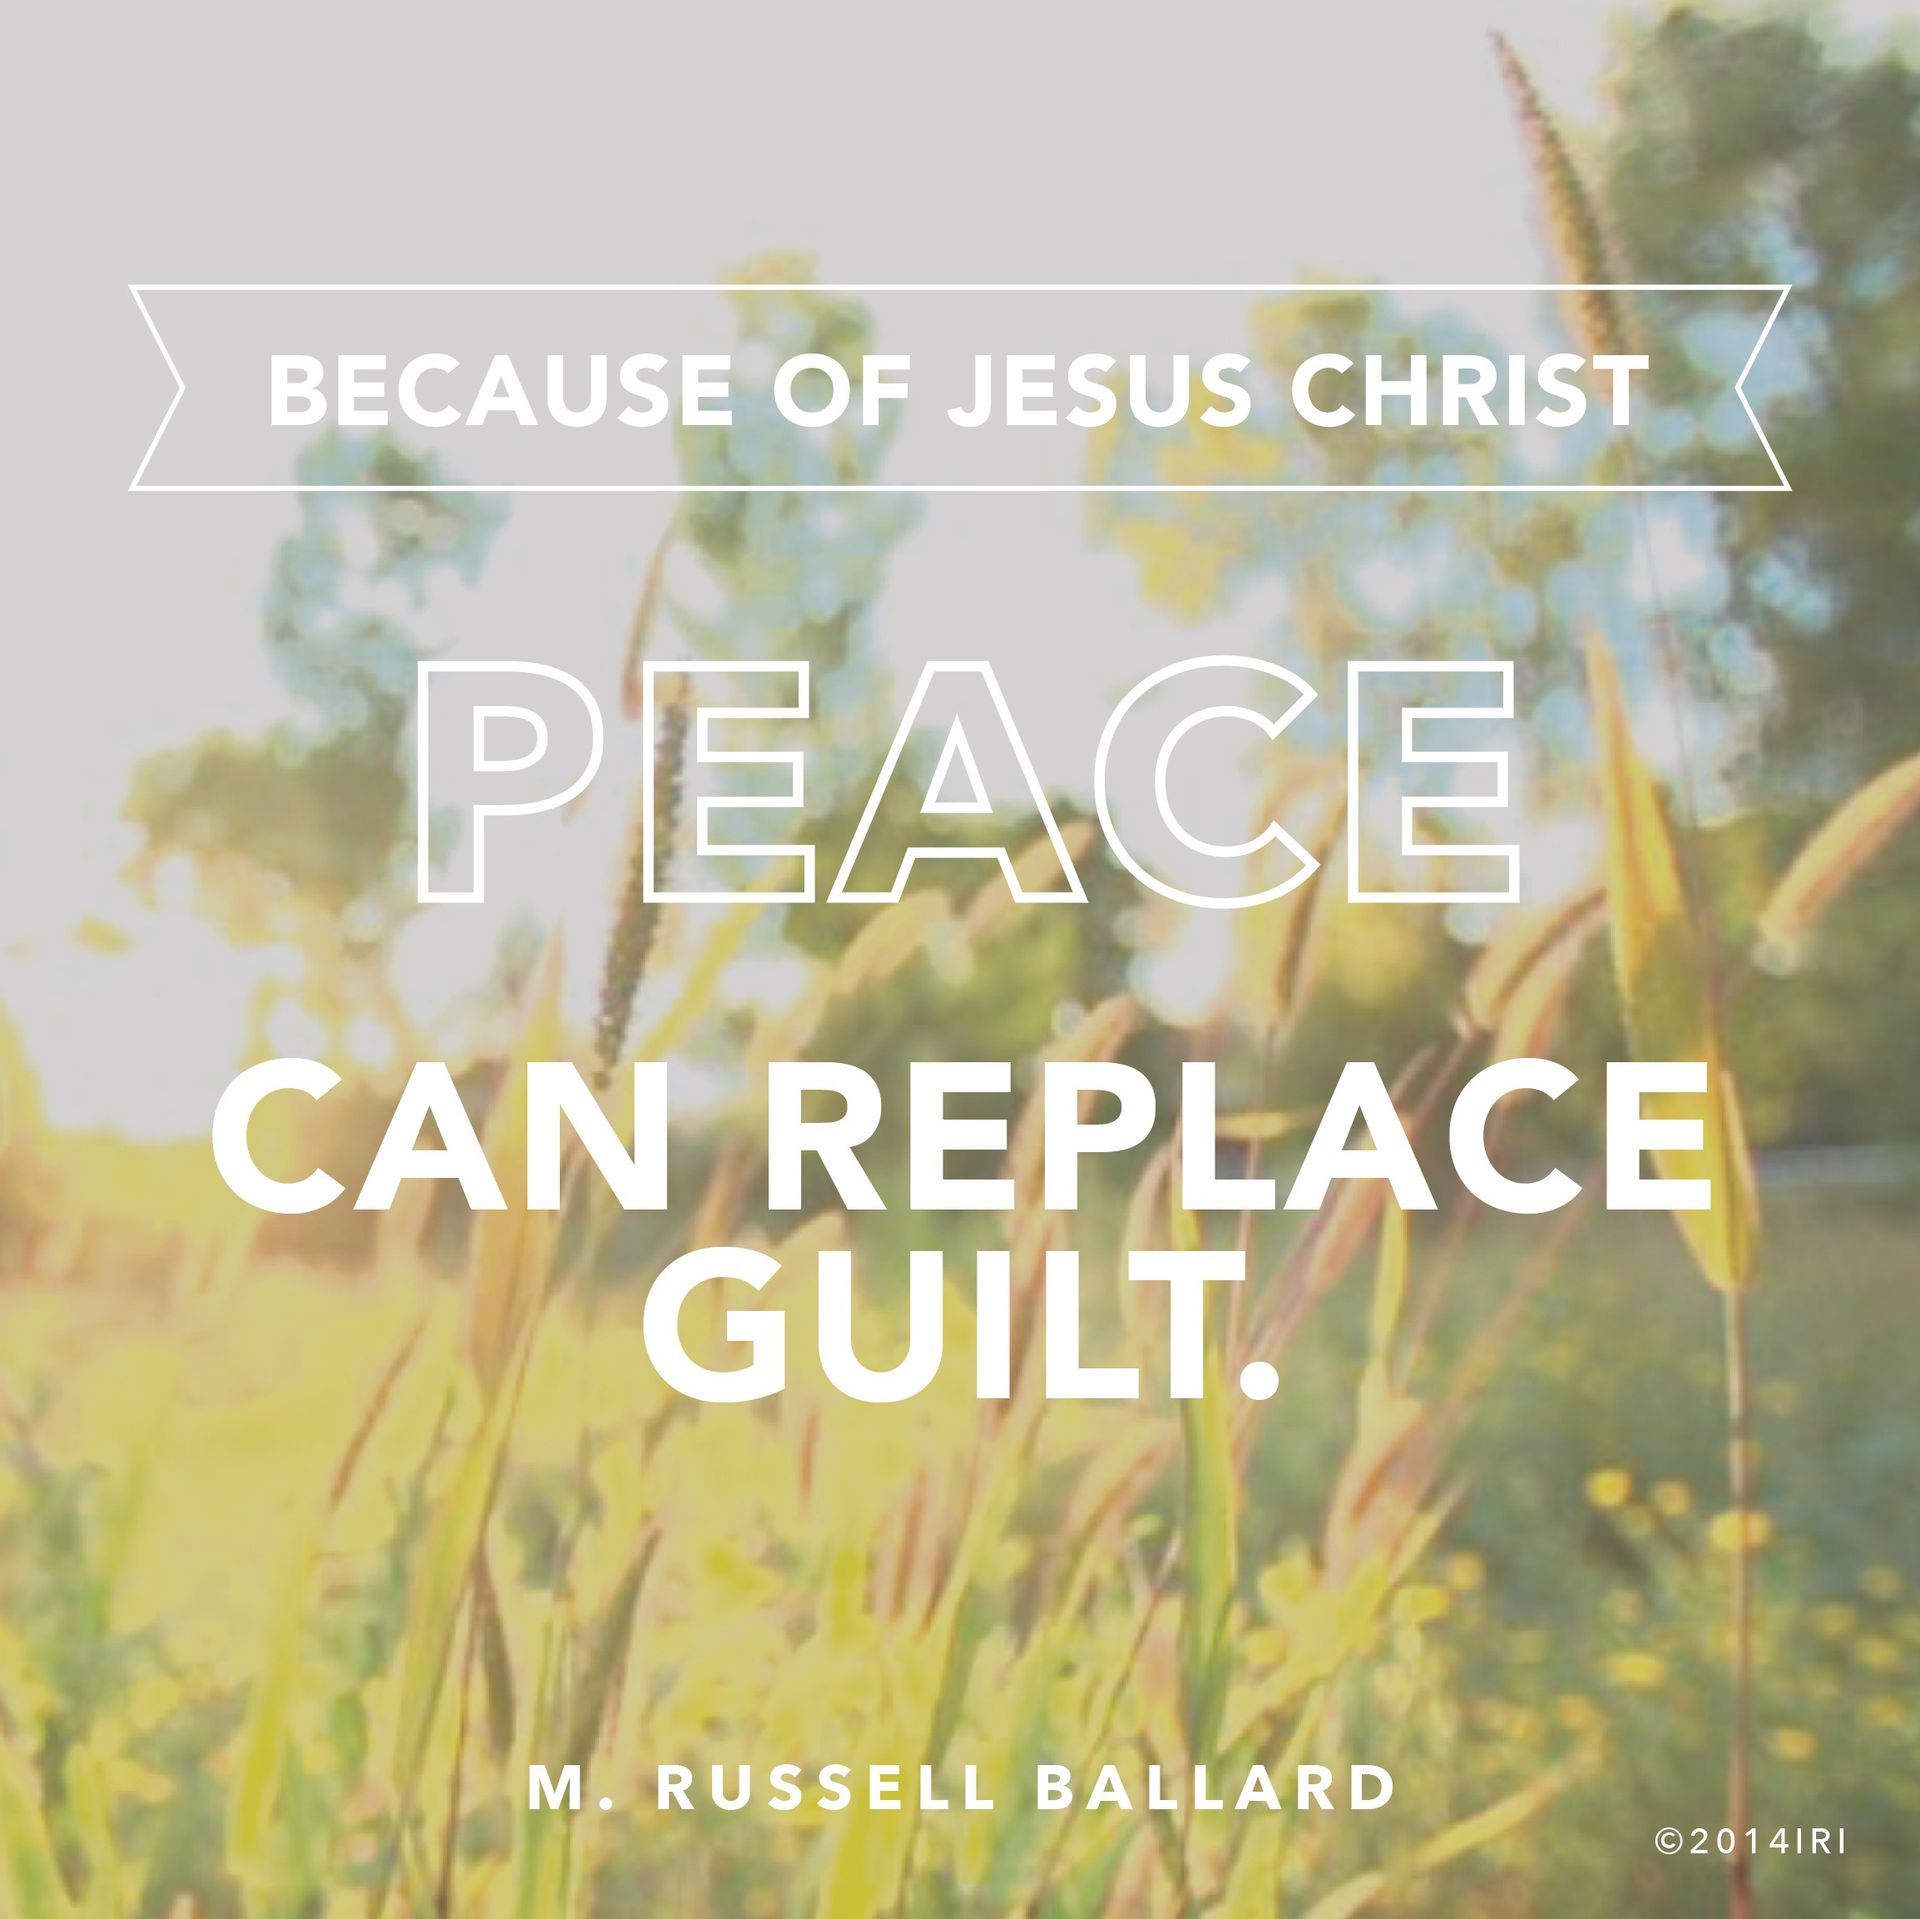 “Because of Jesus Christ, peace can replace guilt.”—Elder M. Russell Ballard, “Be Still, and Know That I Am God” © undefined ipCode 1.